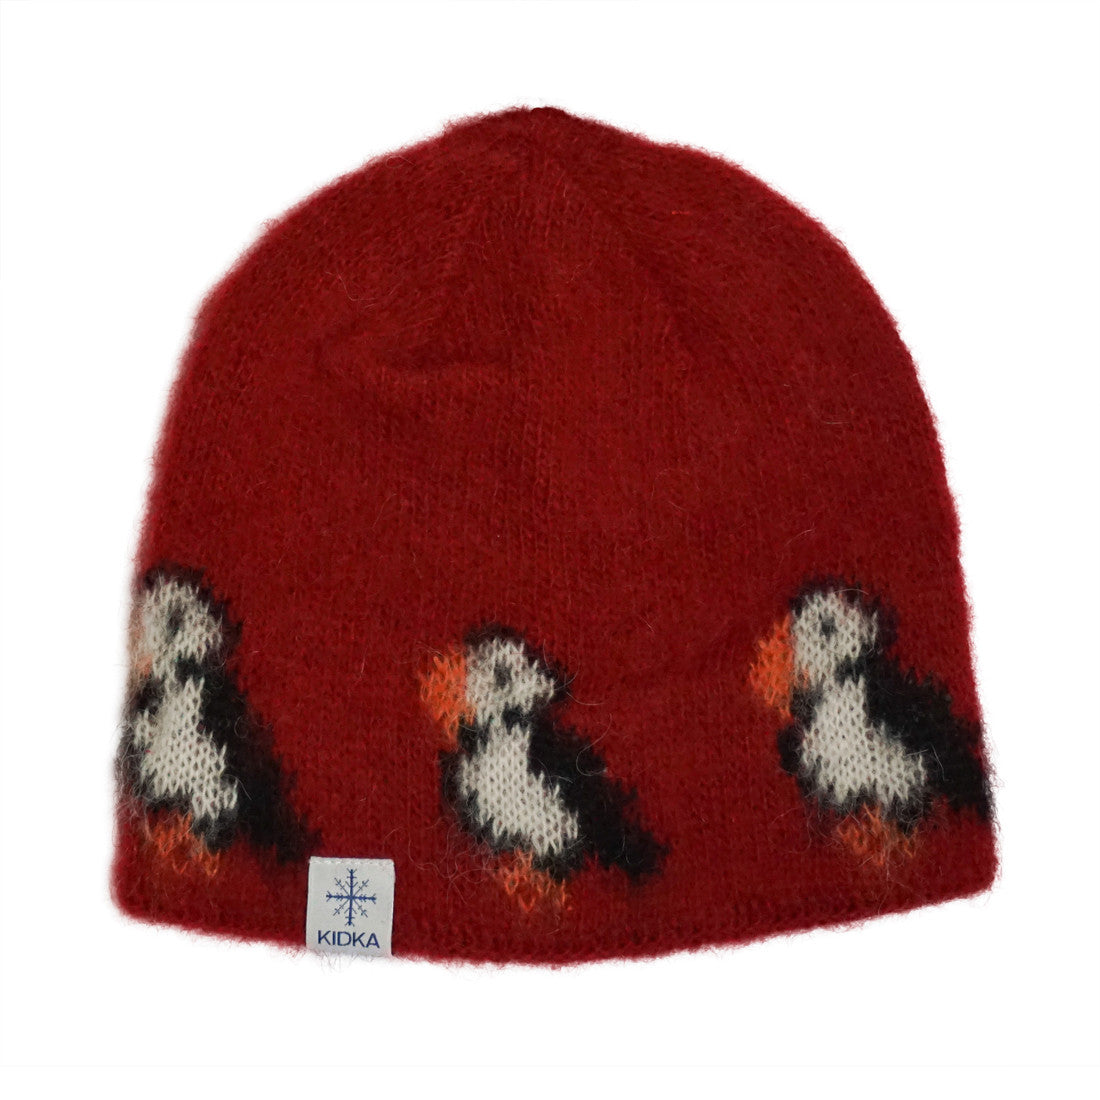 Kidka wool hat - Puffin - Red - Álafoss - Since 1896